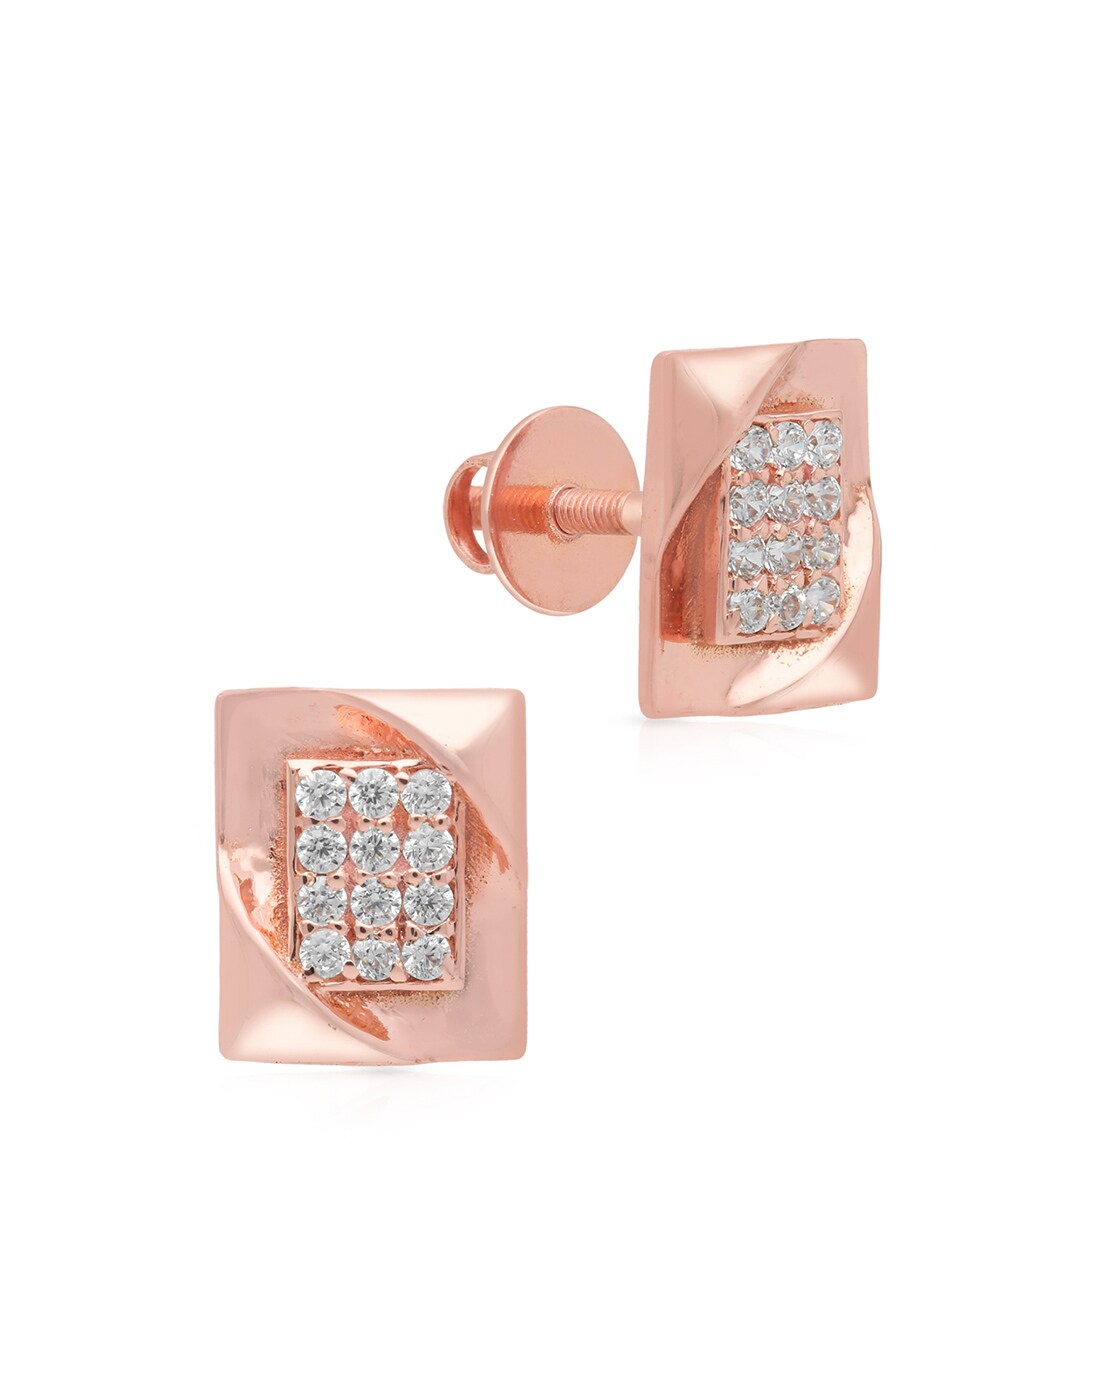 GIVA Rose Gold Floral Studs Earrings - Absolutely Desi